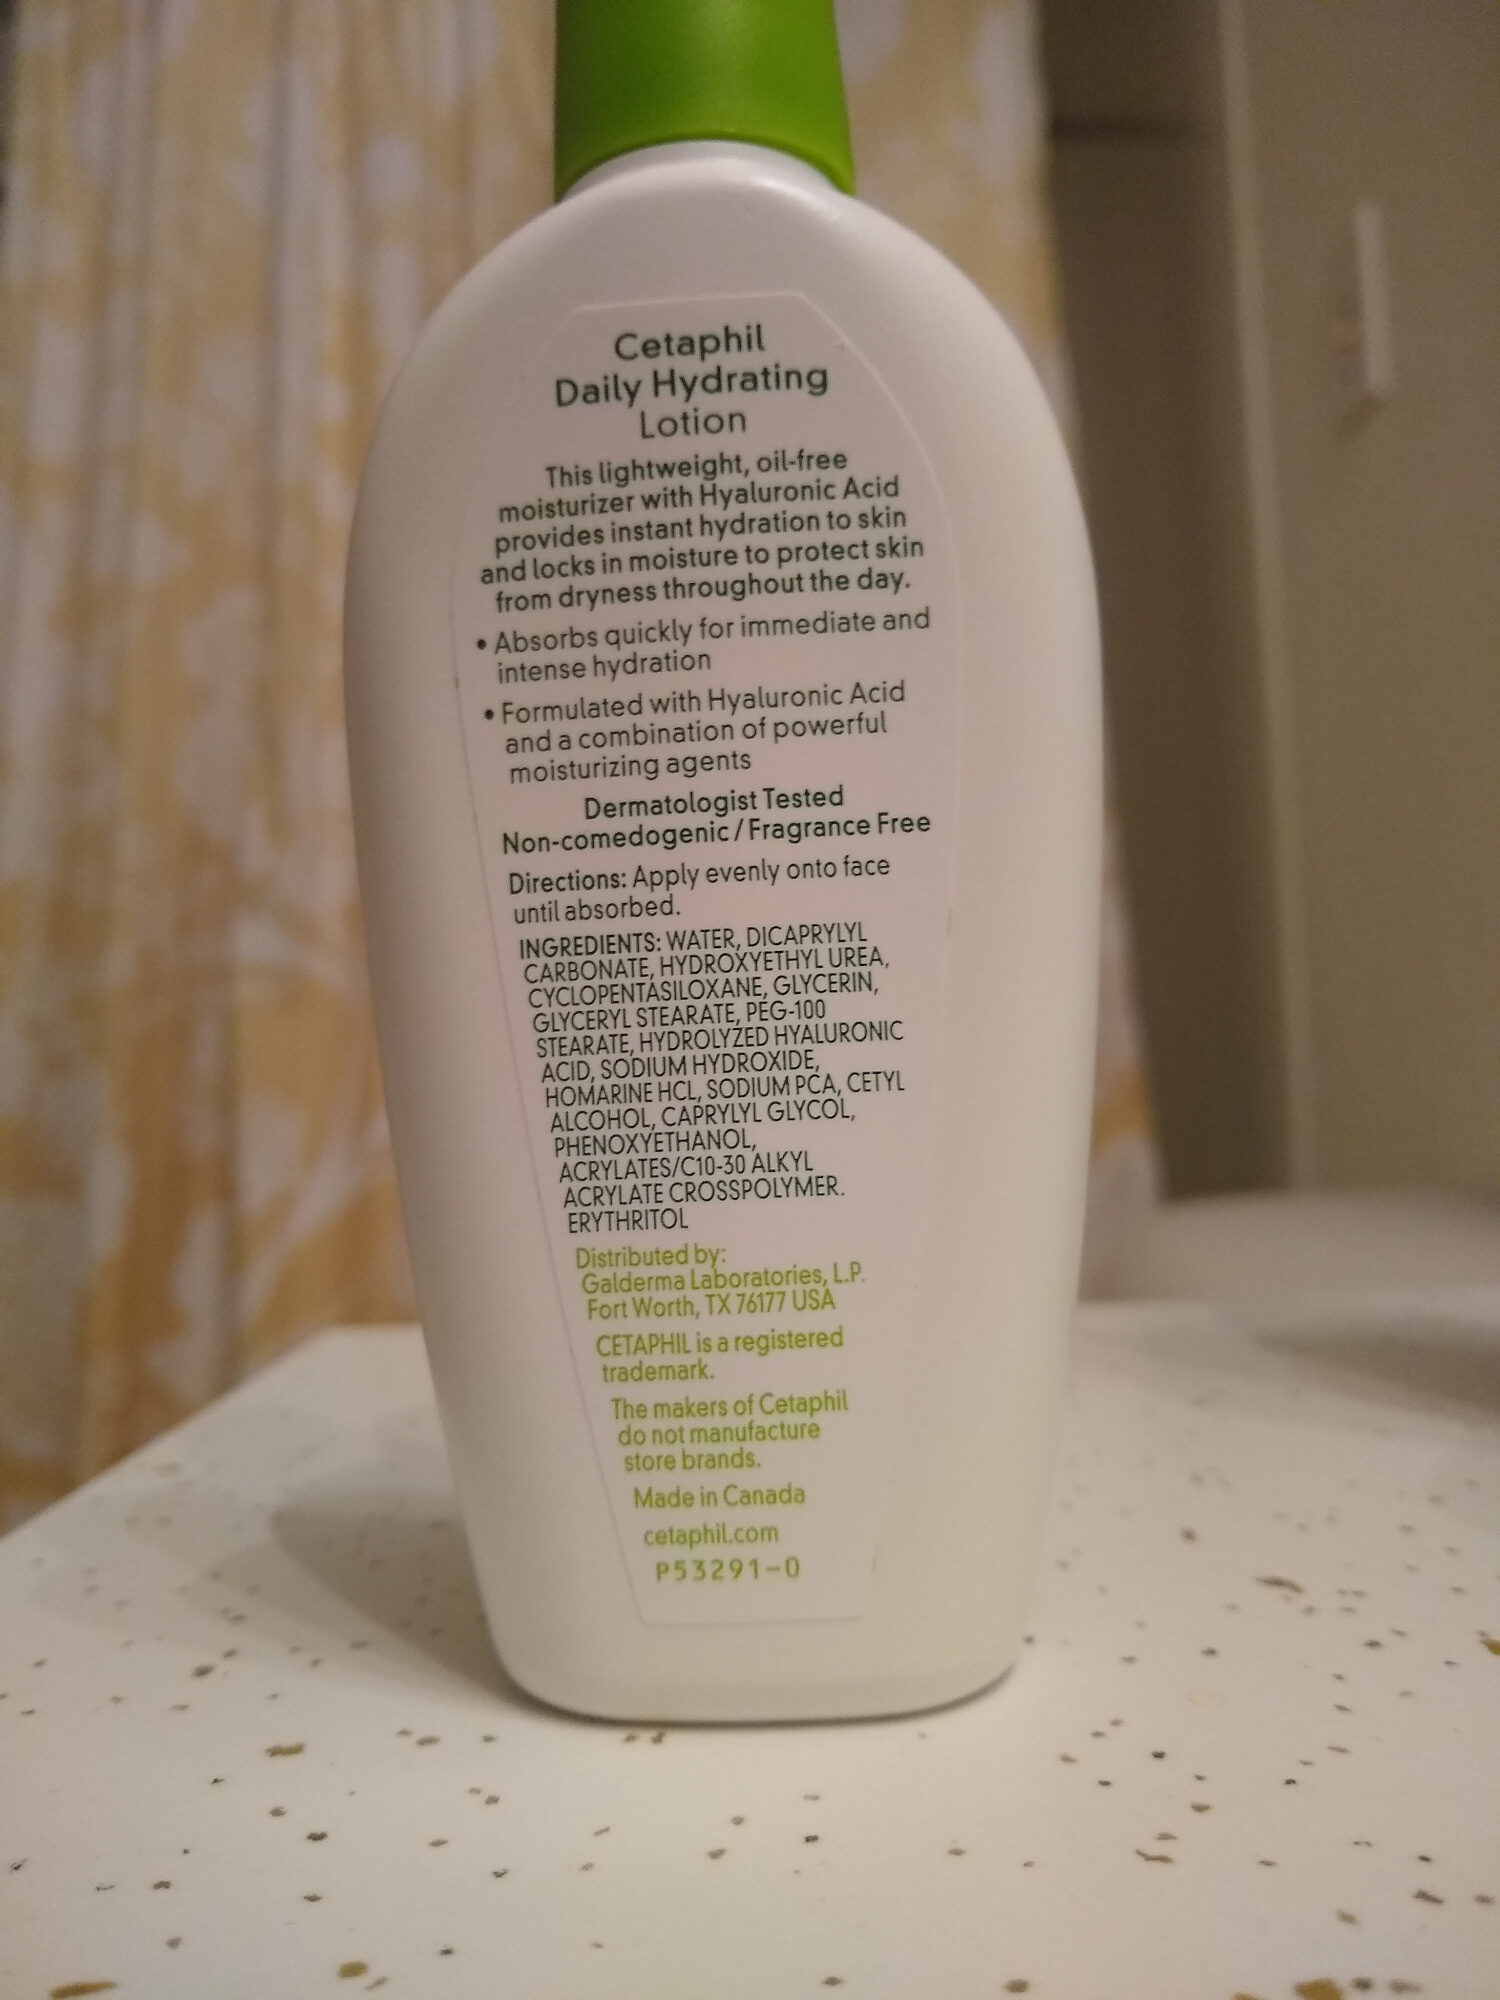 Daily Hydrating Lotion - Ingredients - en